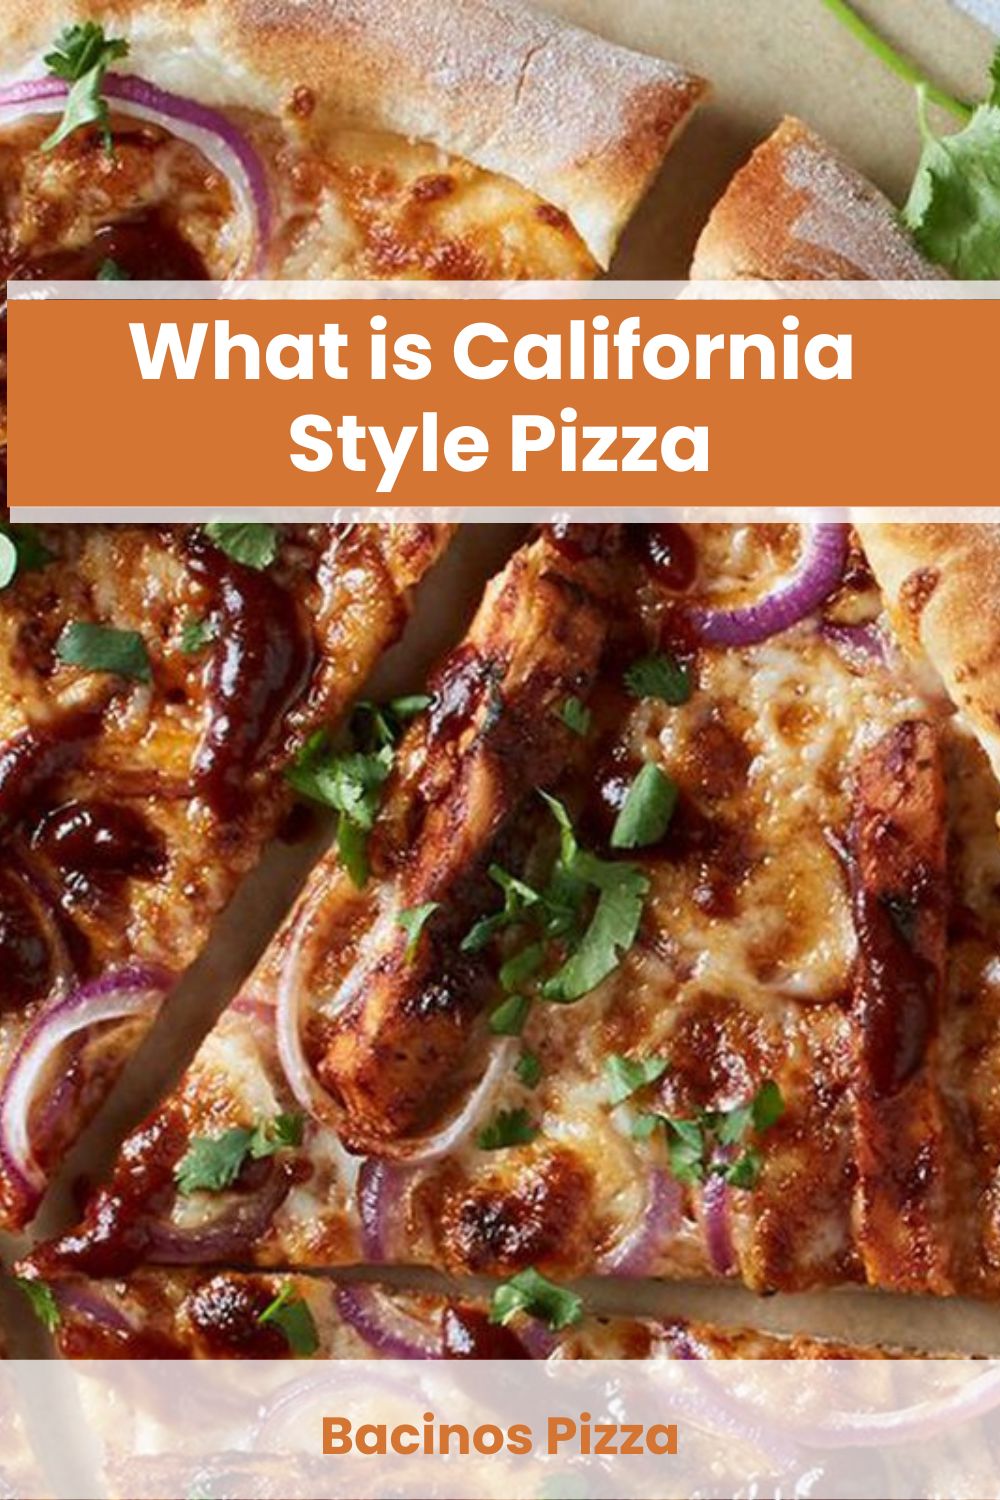 What is California Style Pizza